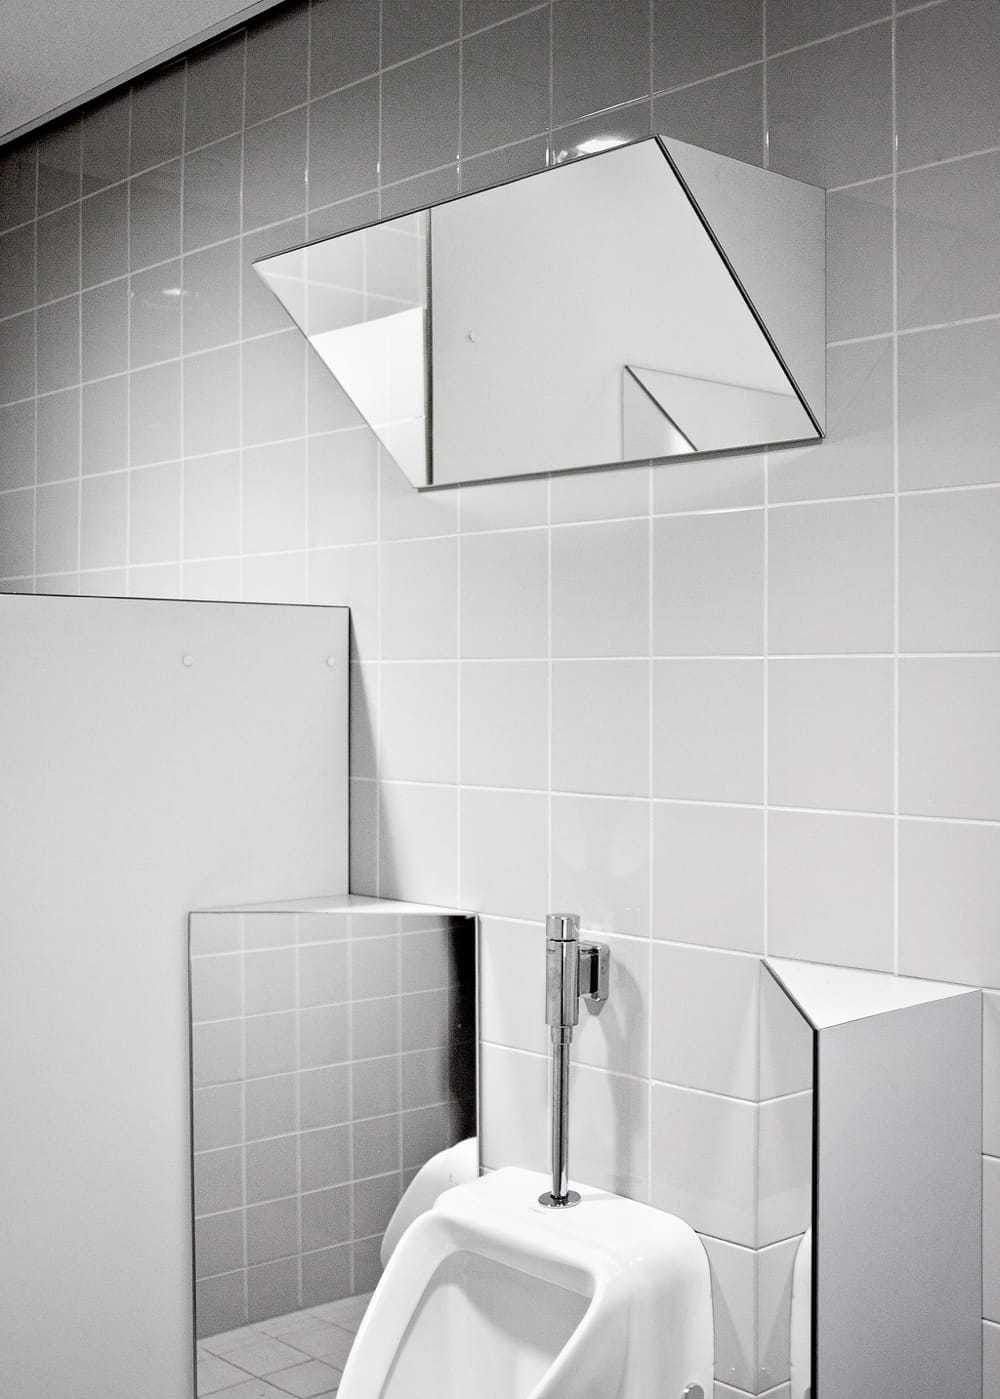 Mirrors are installed around the urinal, allowing of cers to oversee the procedure of the inmate taking a urine- sample. 
Penitentiary Overmaze, remodeled into a facility for detention under hospital order (TBS) 
Maastricht, 2014